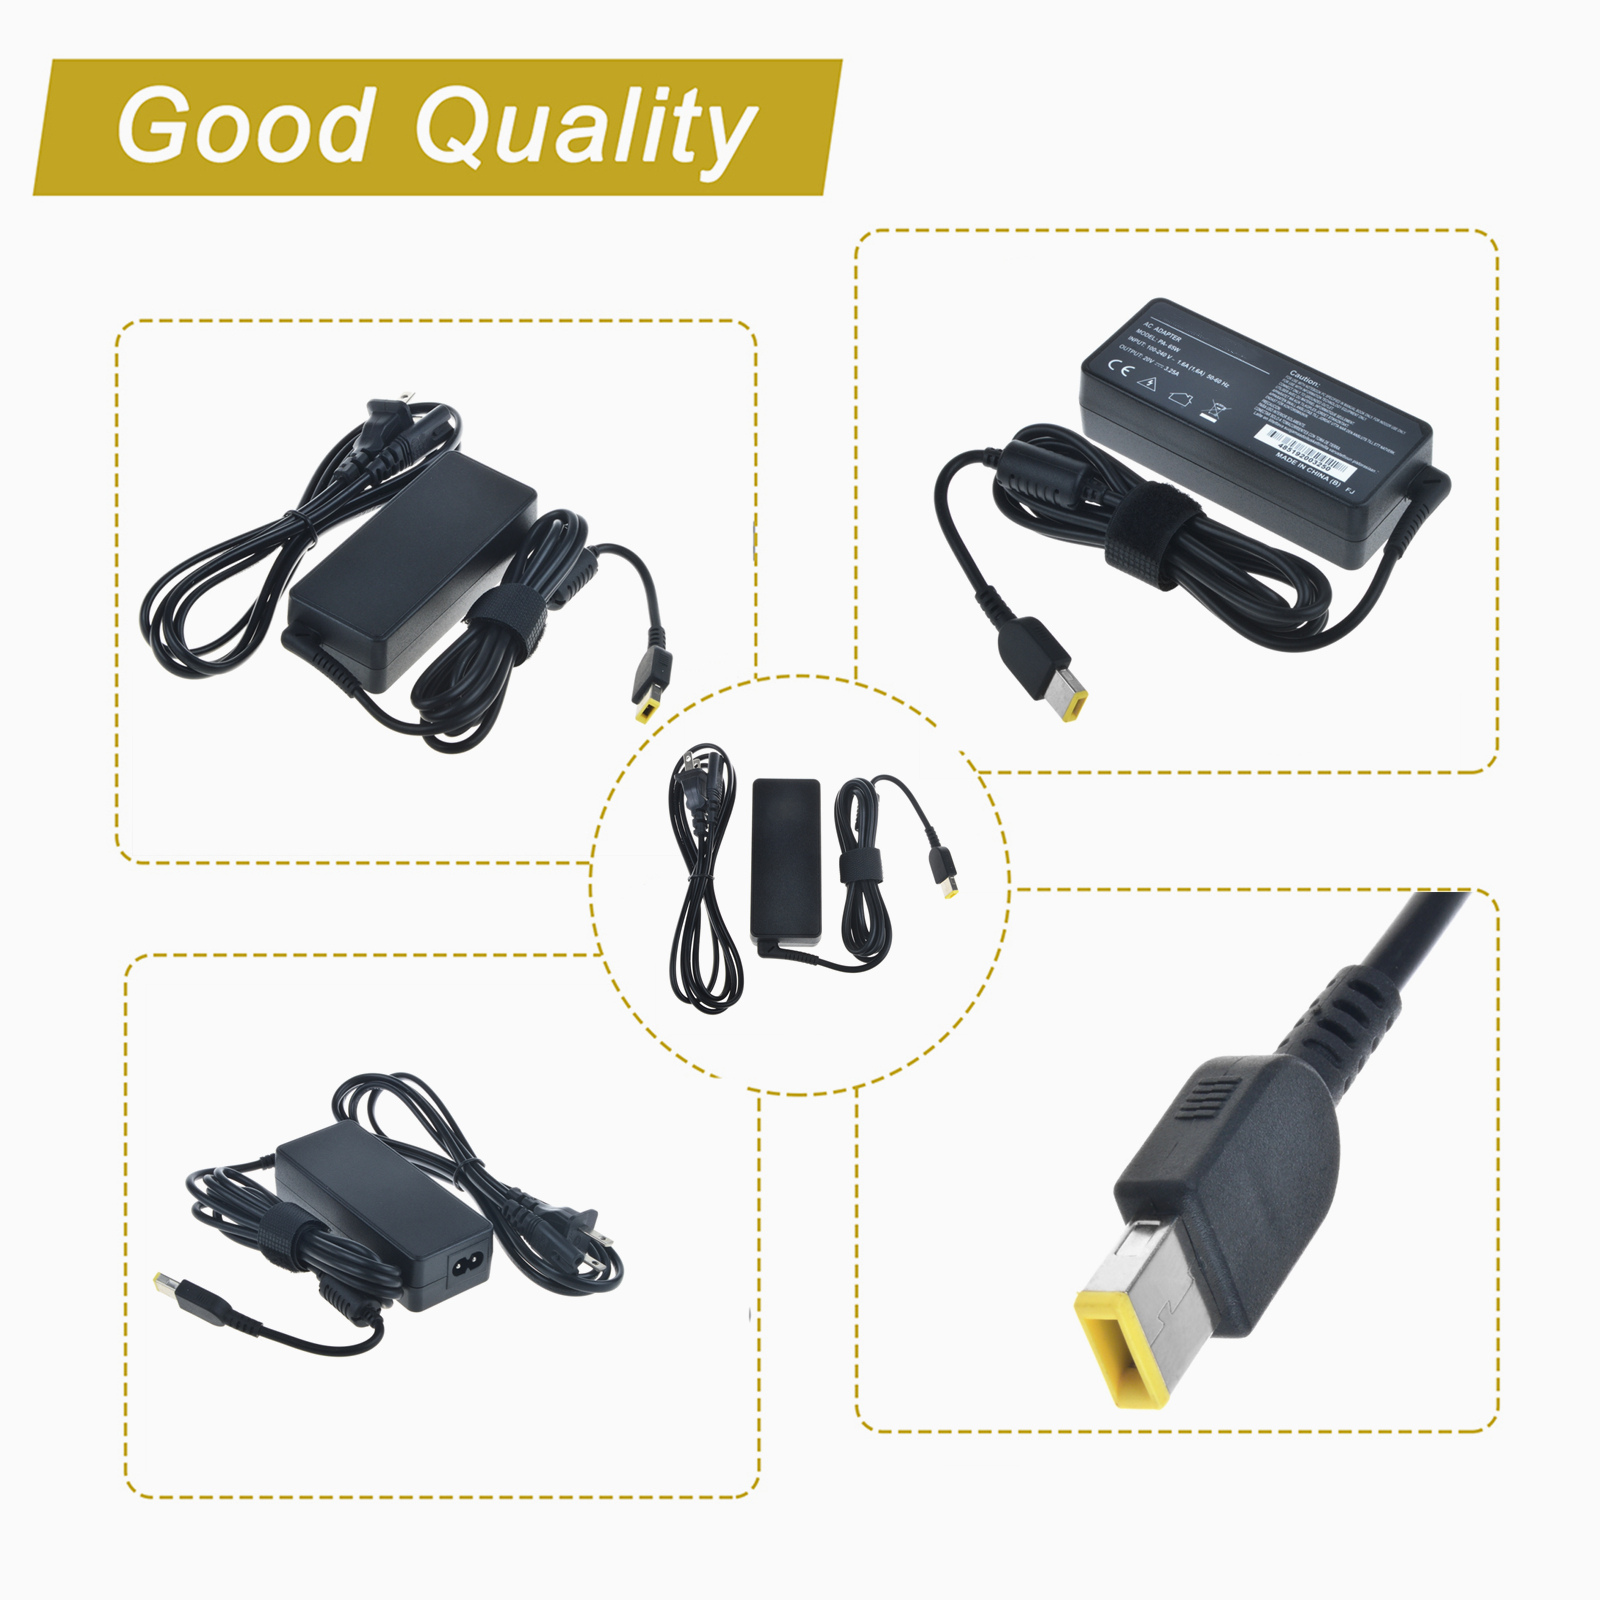 KONKIN BOO Compatible AC/DC Adapter Replacement for Lenovo P/4X20E53346 4X20E53347 4X20E53348 4X20E53349 4X20E53350 4X20E53351 Power Supply Cord Cable PS Charger Mains PSU - image 2 of 5